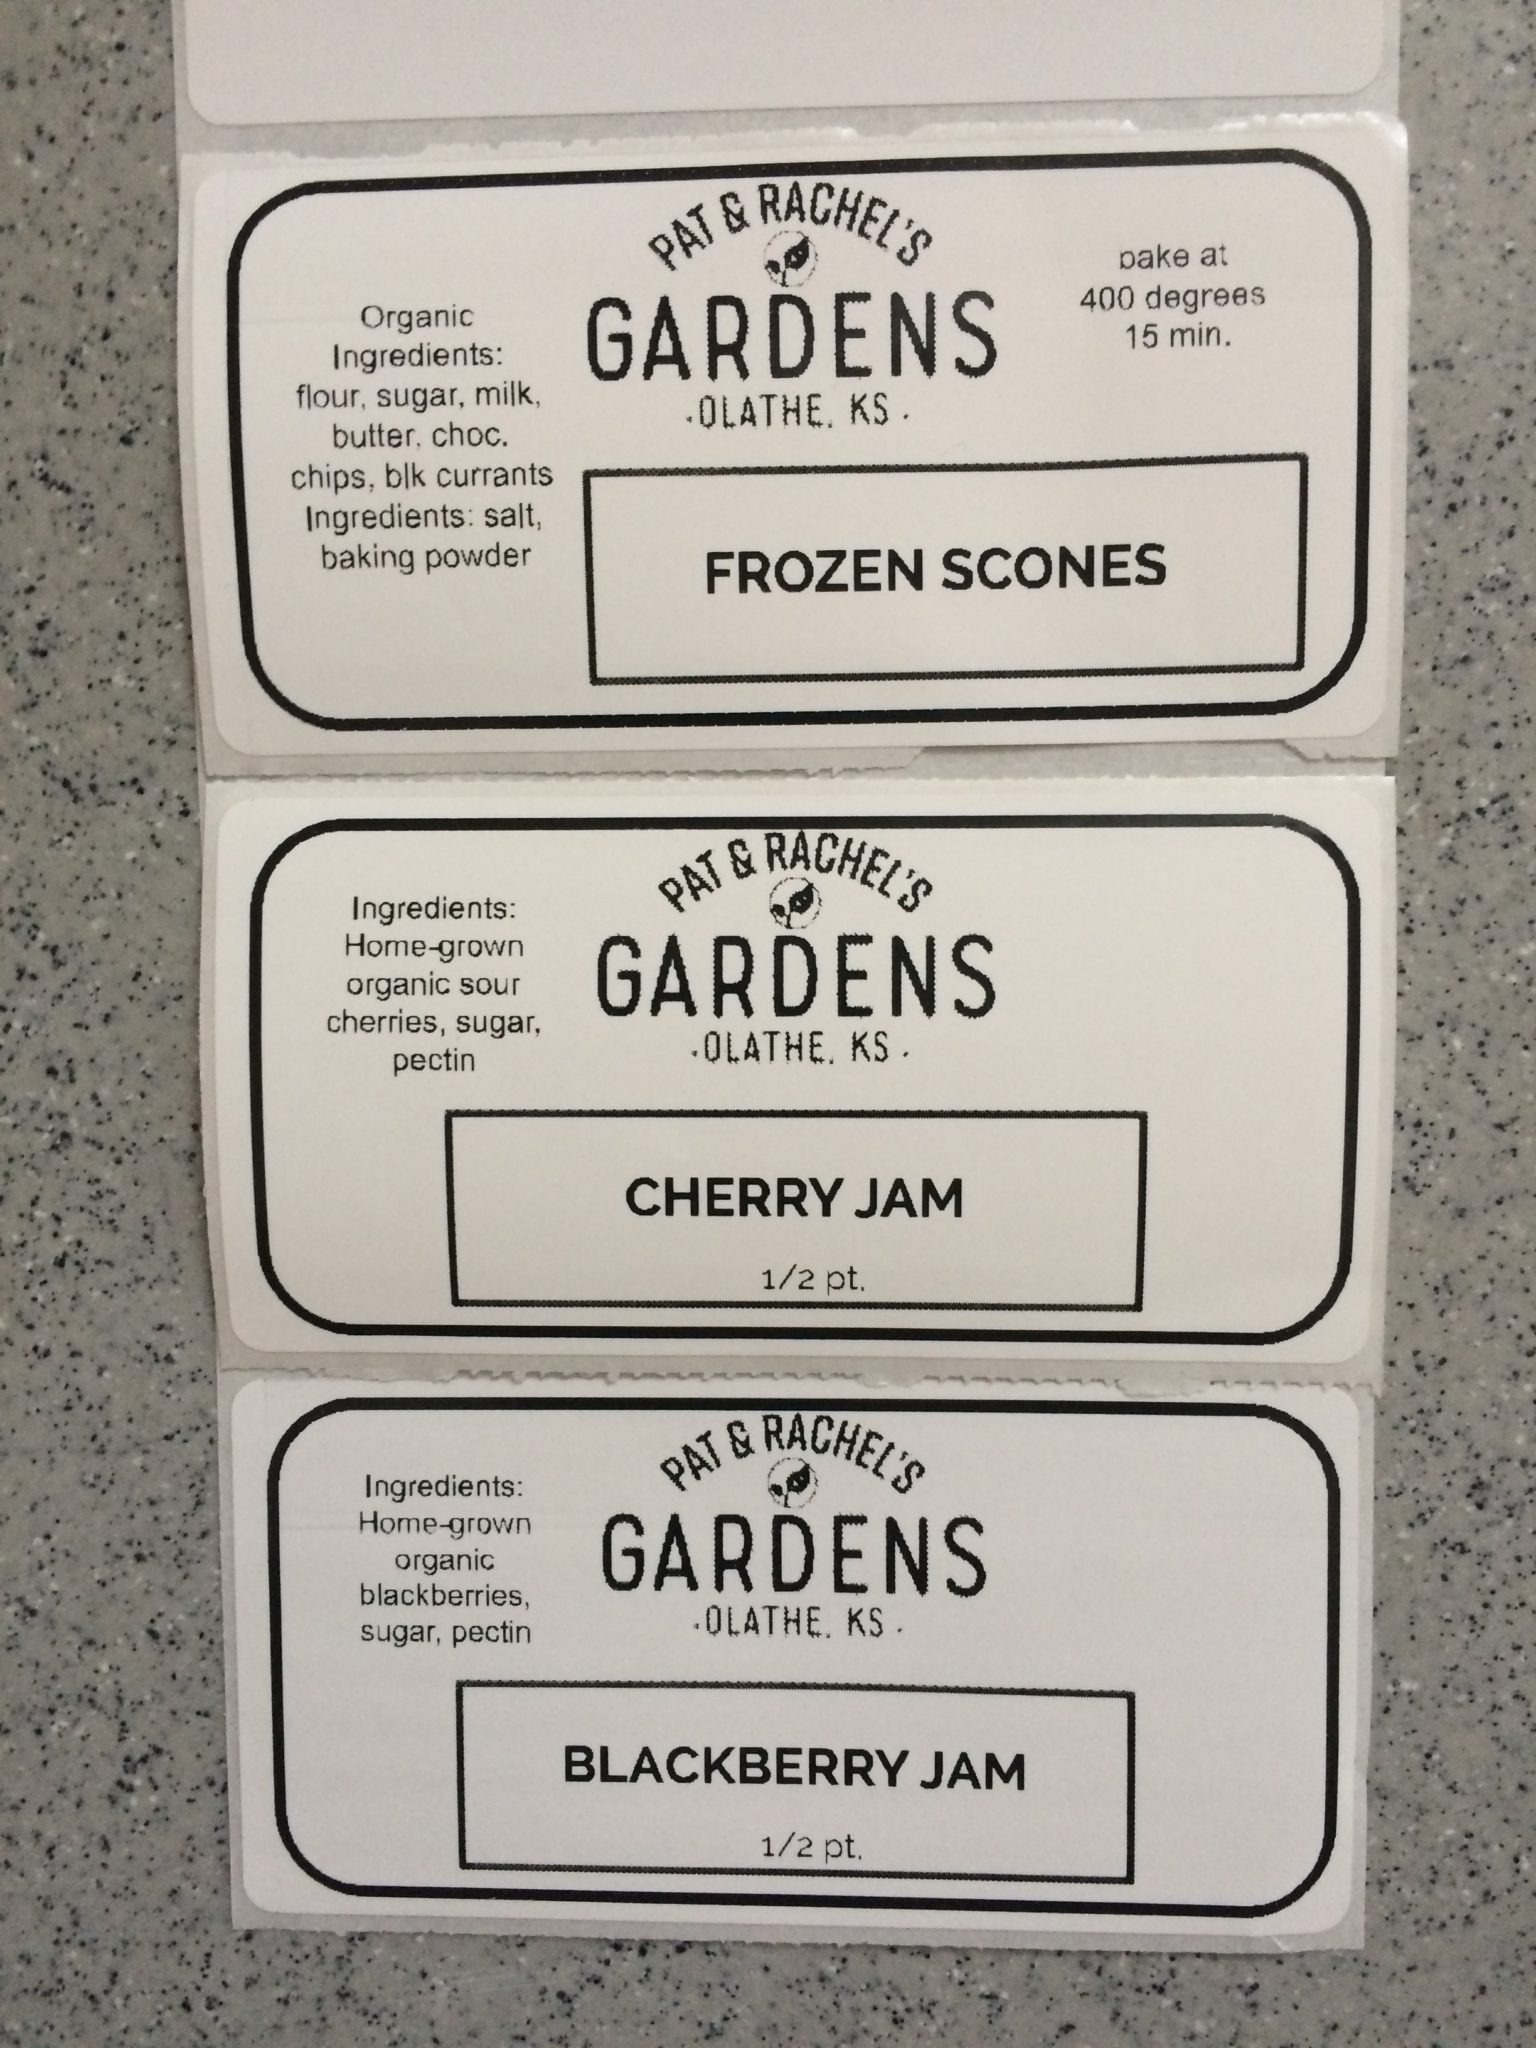 labels for frozen scones and jams